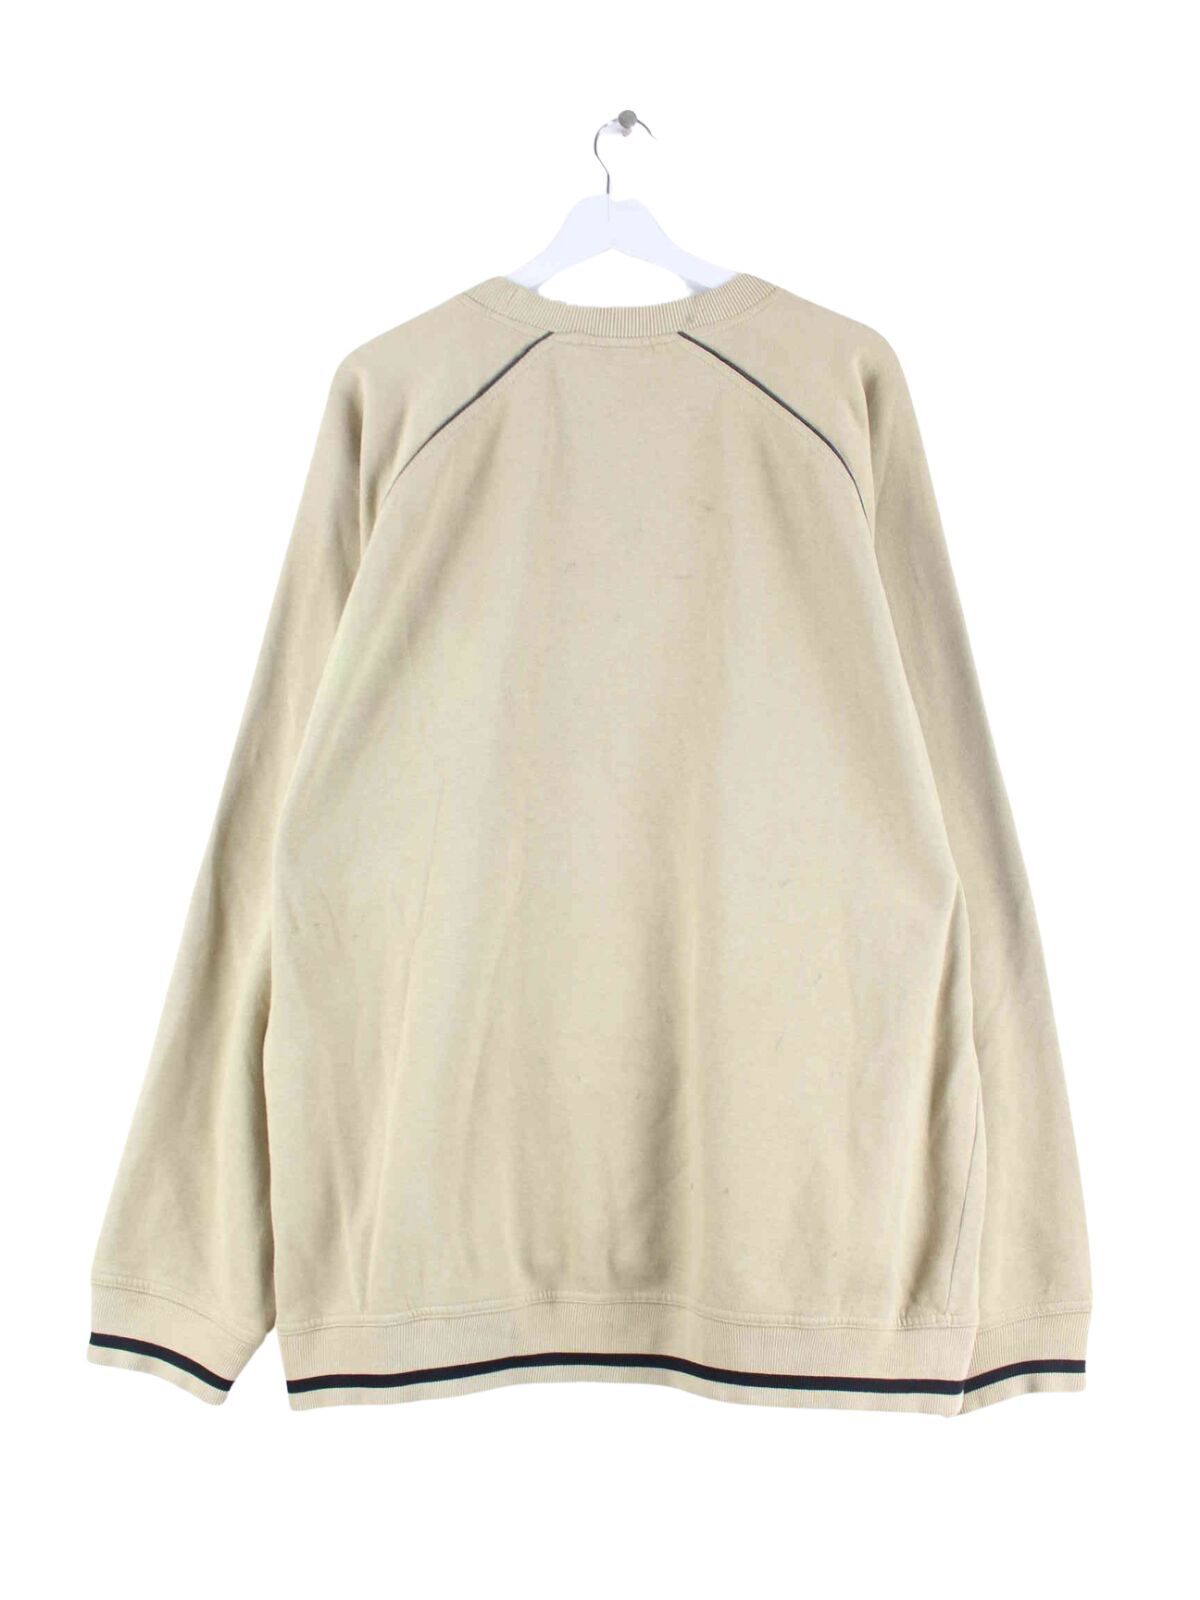 Puma 00s Embroidered Sweater Beige XL (back image)